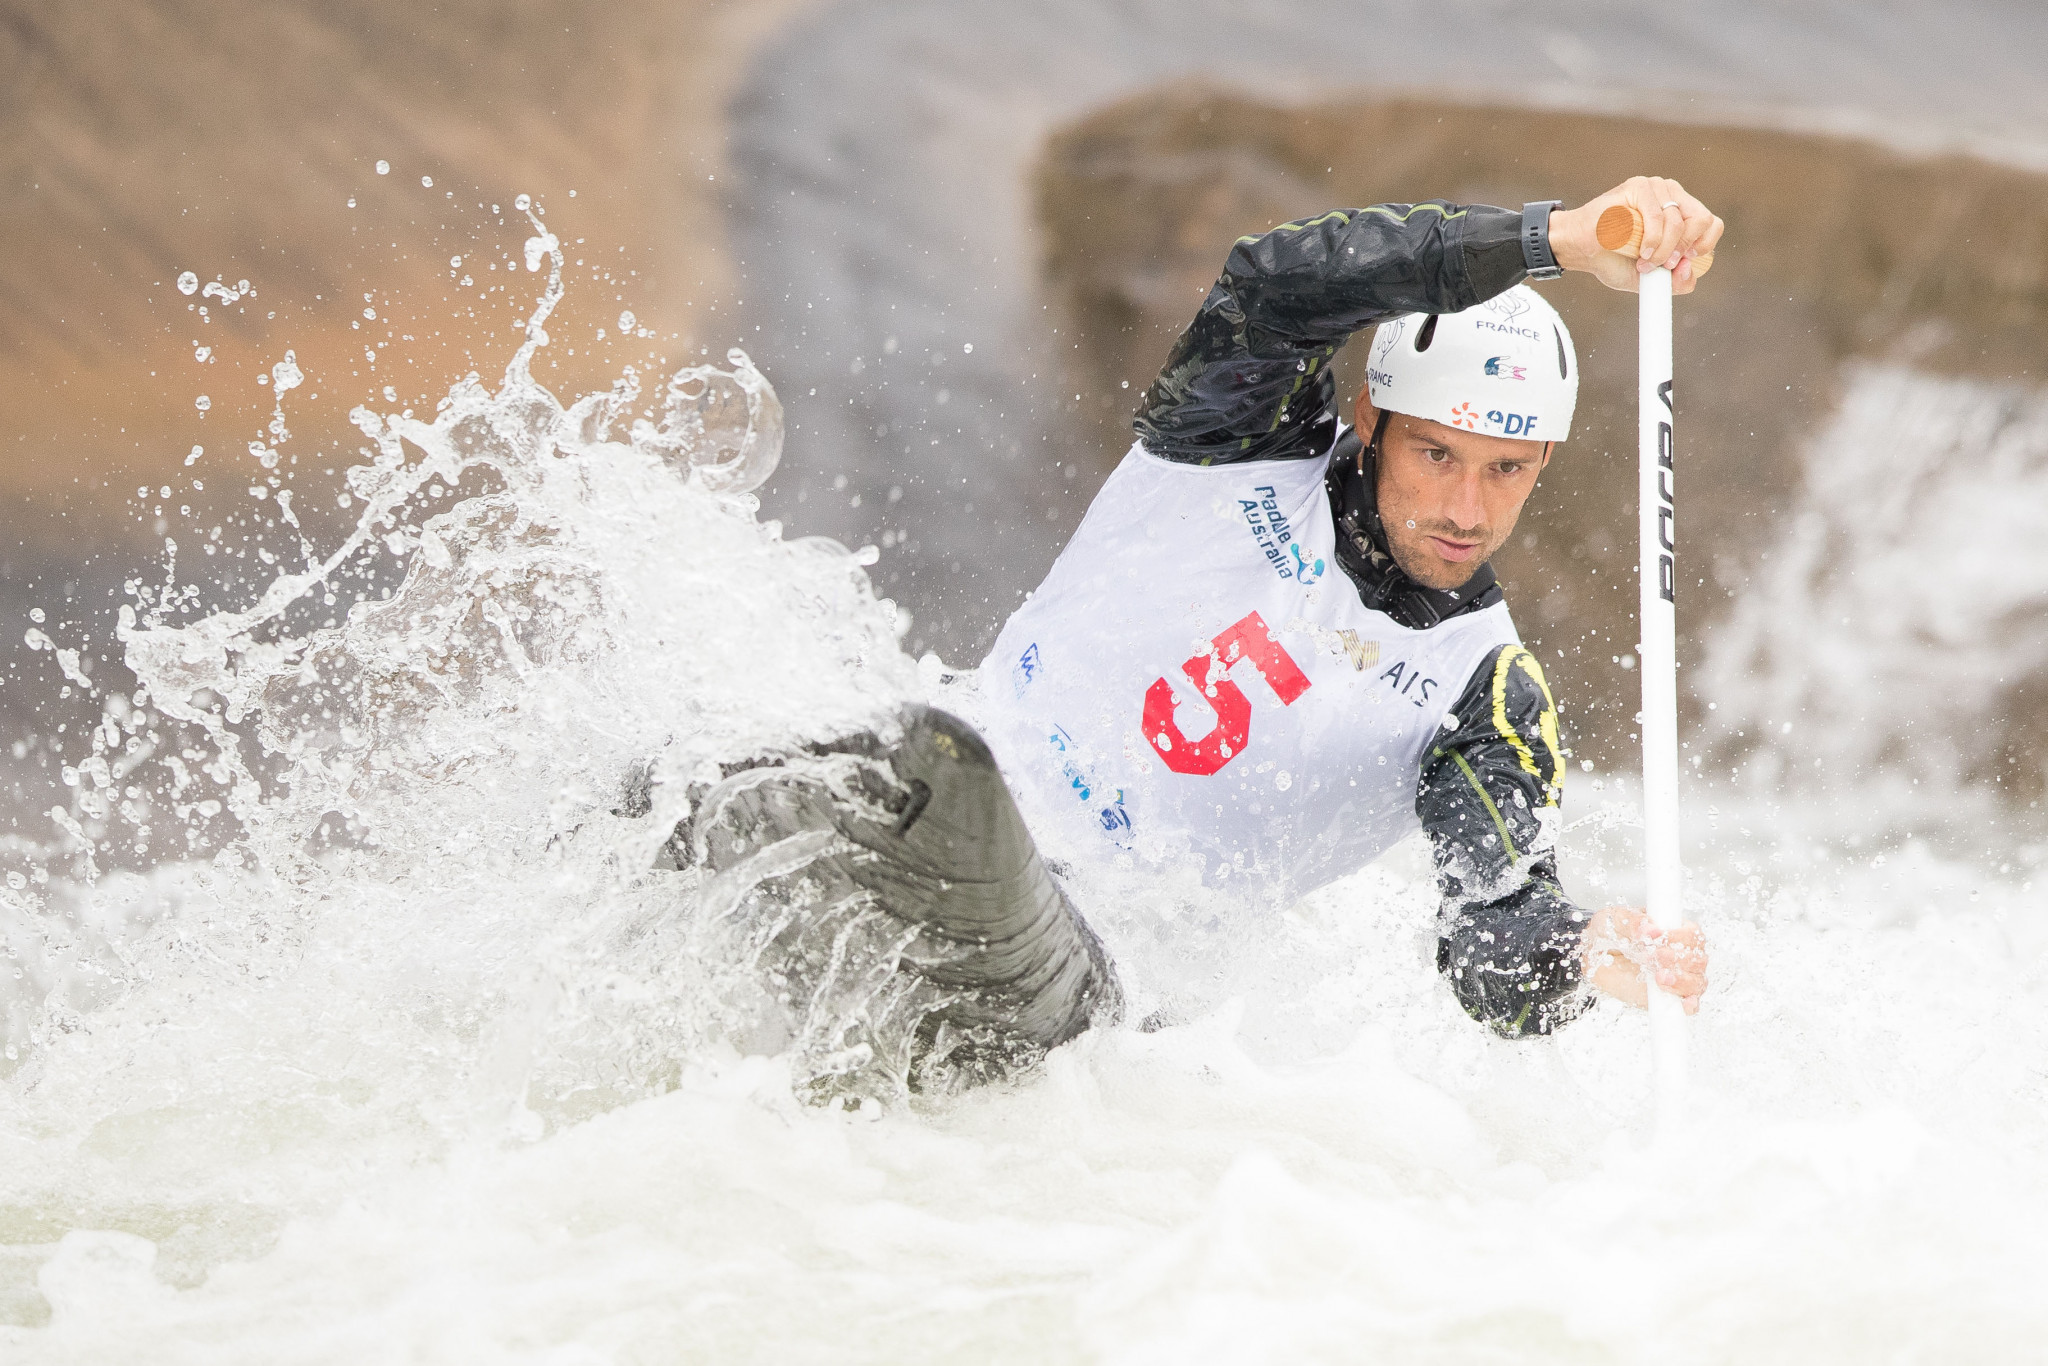 Denis Gargaud Chanut is a medal hope for hosts France at the Canoe Slalom European Championships in Pau ©Getty Images